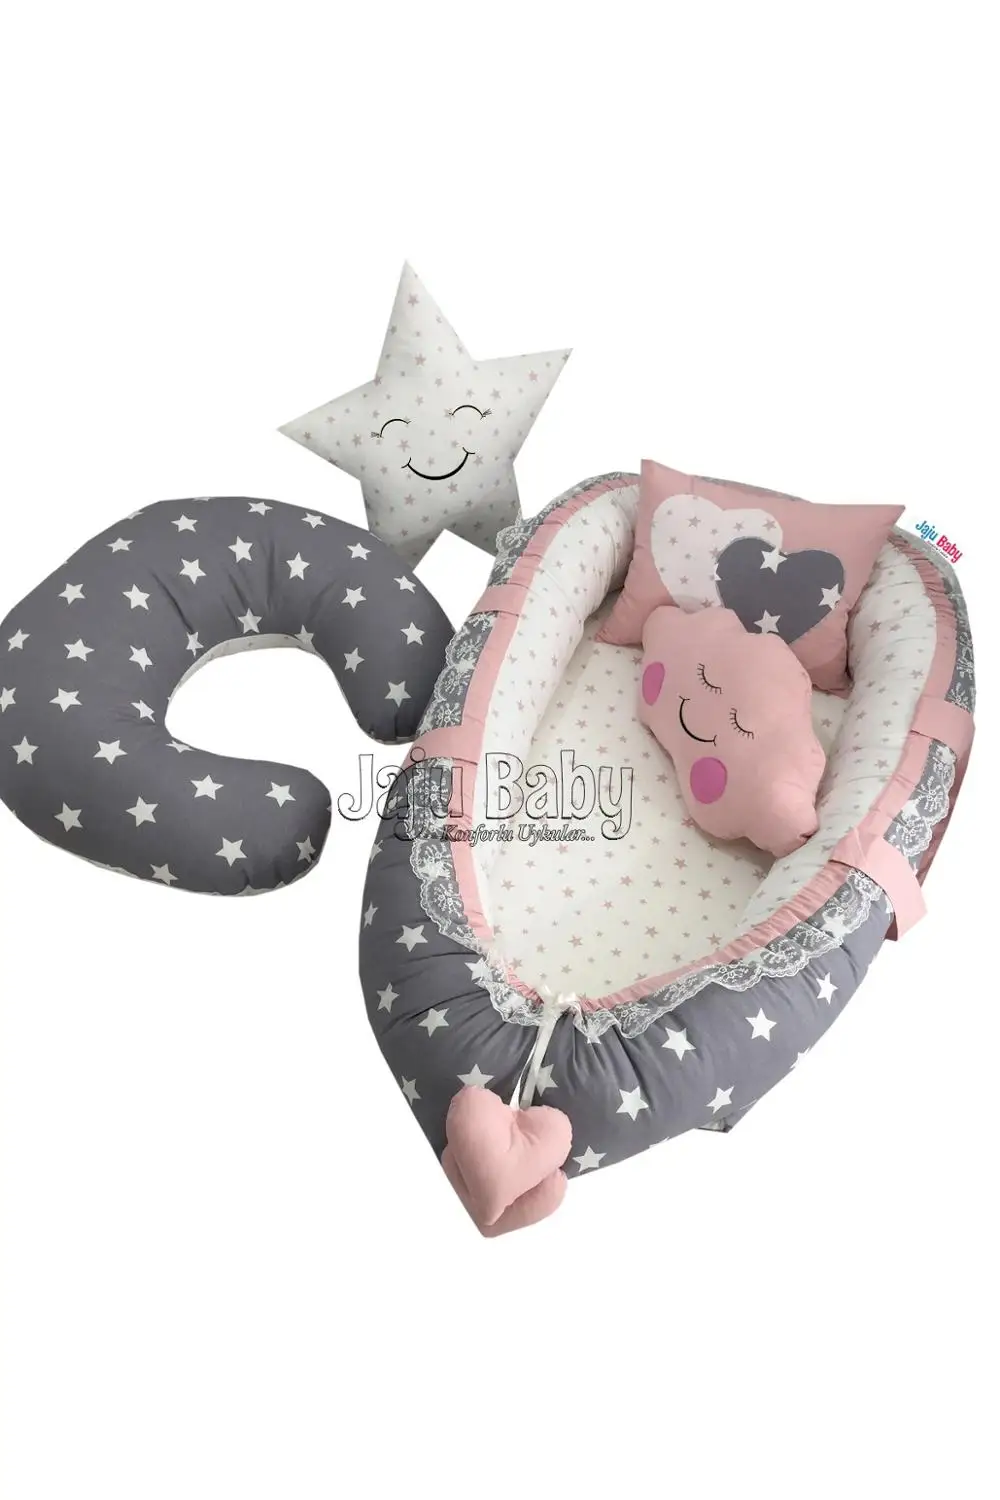 Jaju Baby Handmade Powder and Gray Star Luxury Orthopedic Babynest and Breastfeeding Pillow 5 Piece Bedding Set Mother Side Bed